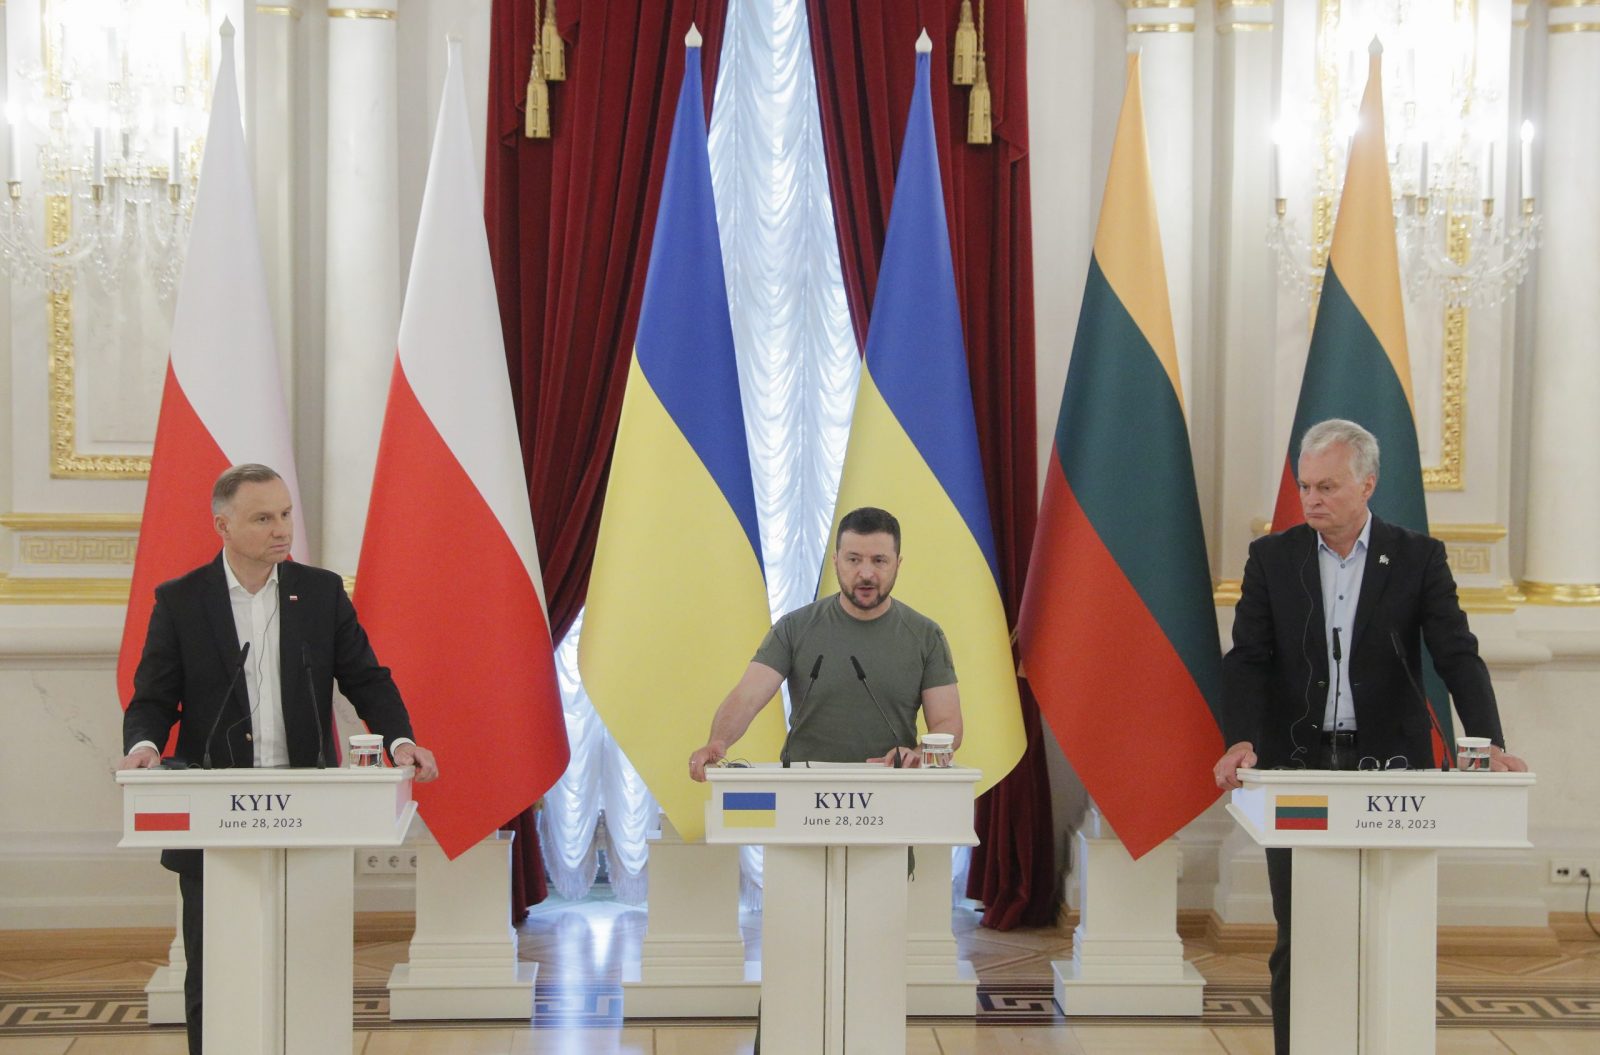 epa10715470 Ukrainian President Volodymyr Zelensky (C), Polish President Andrzej Duda (L), and Lithuanian President Gitanas Nauseda (R) attend a joint press conference after their meeting in Kyiv, Ukraine, 28 June 2023. Andrzej Duda and Gitanas Nauseda arrived in Kyiv to meet with top Ukrainian officials and express their support for Ukraine amid the Russian invasion.  EPA/SERGEY DOLZHENKO